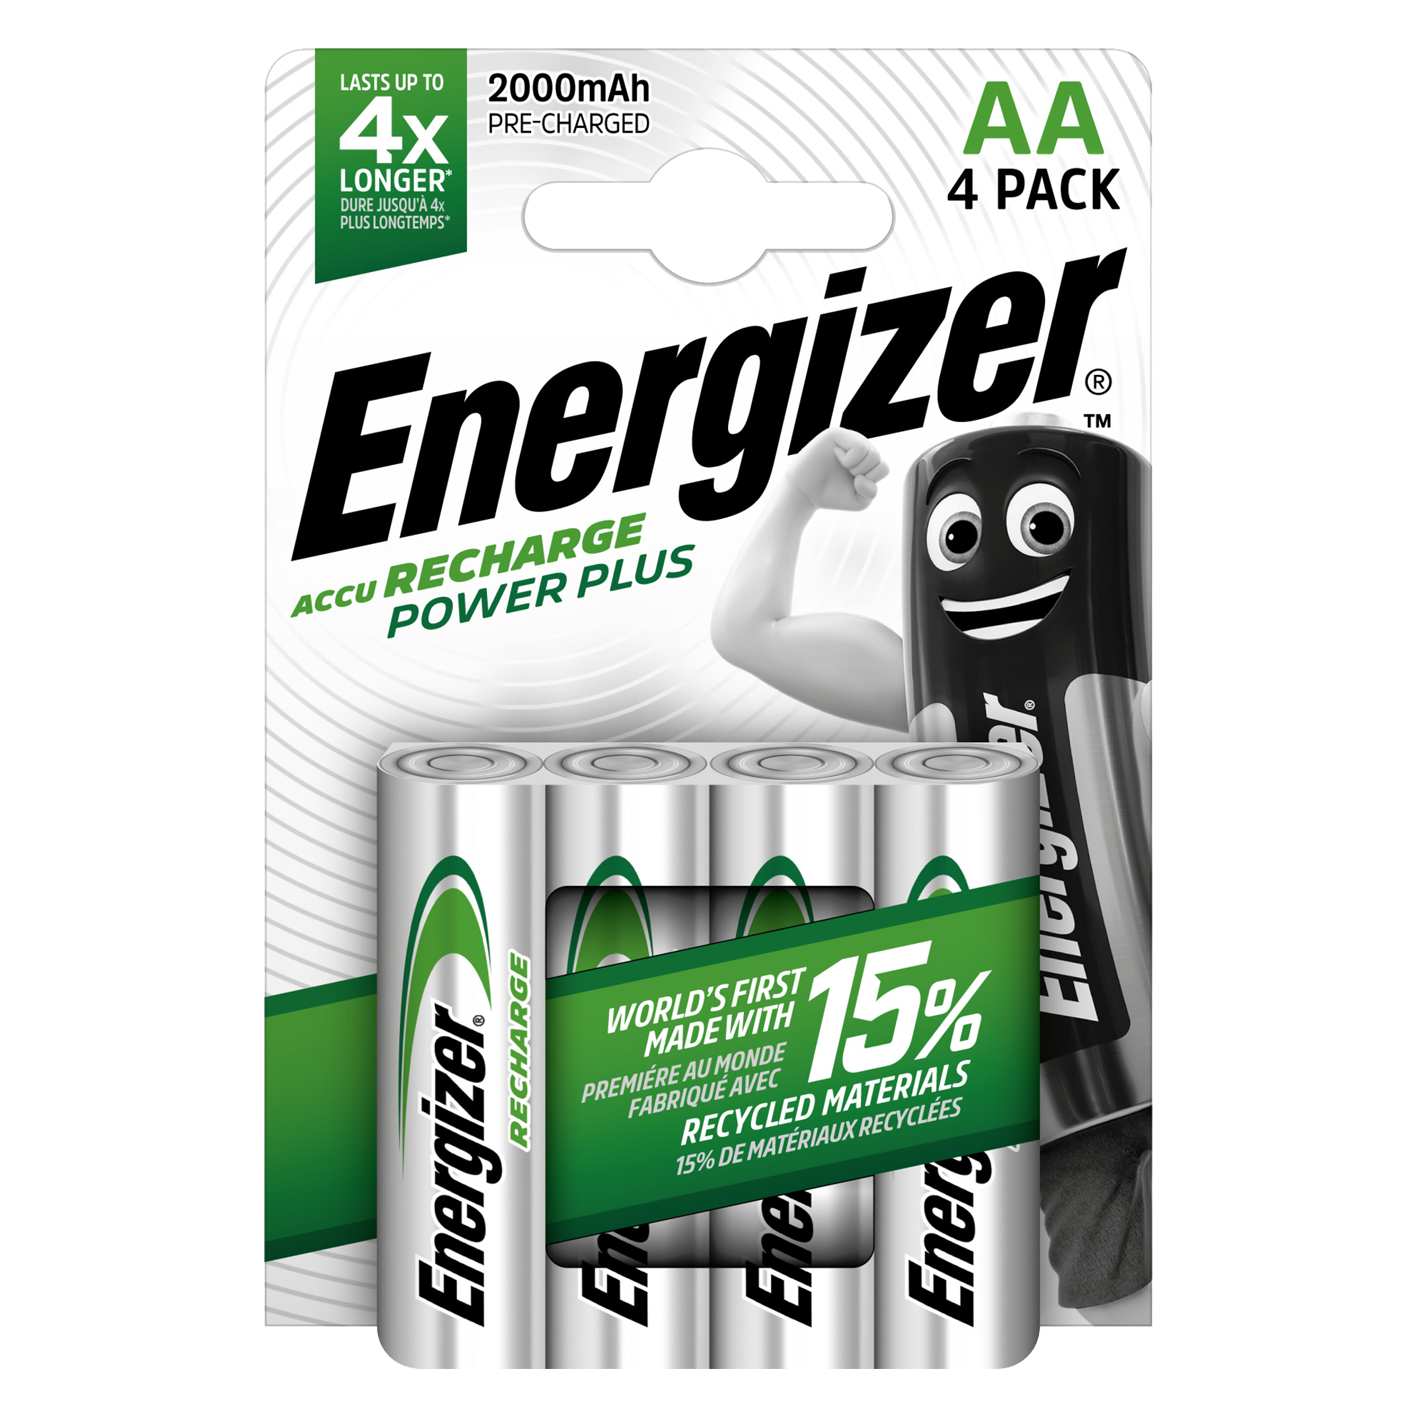 Energizer AA 2000mAh Recharge Power Plus, Pack of 4